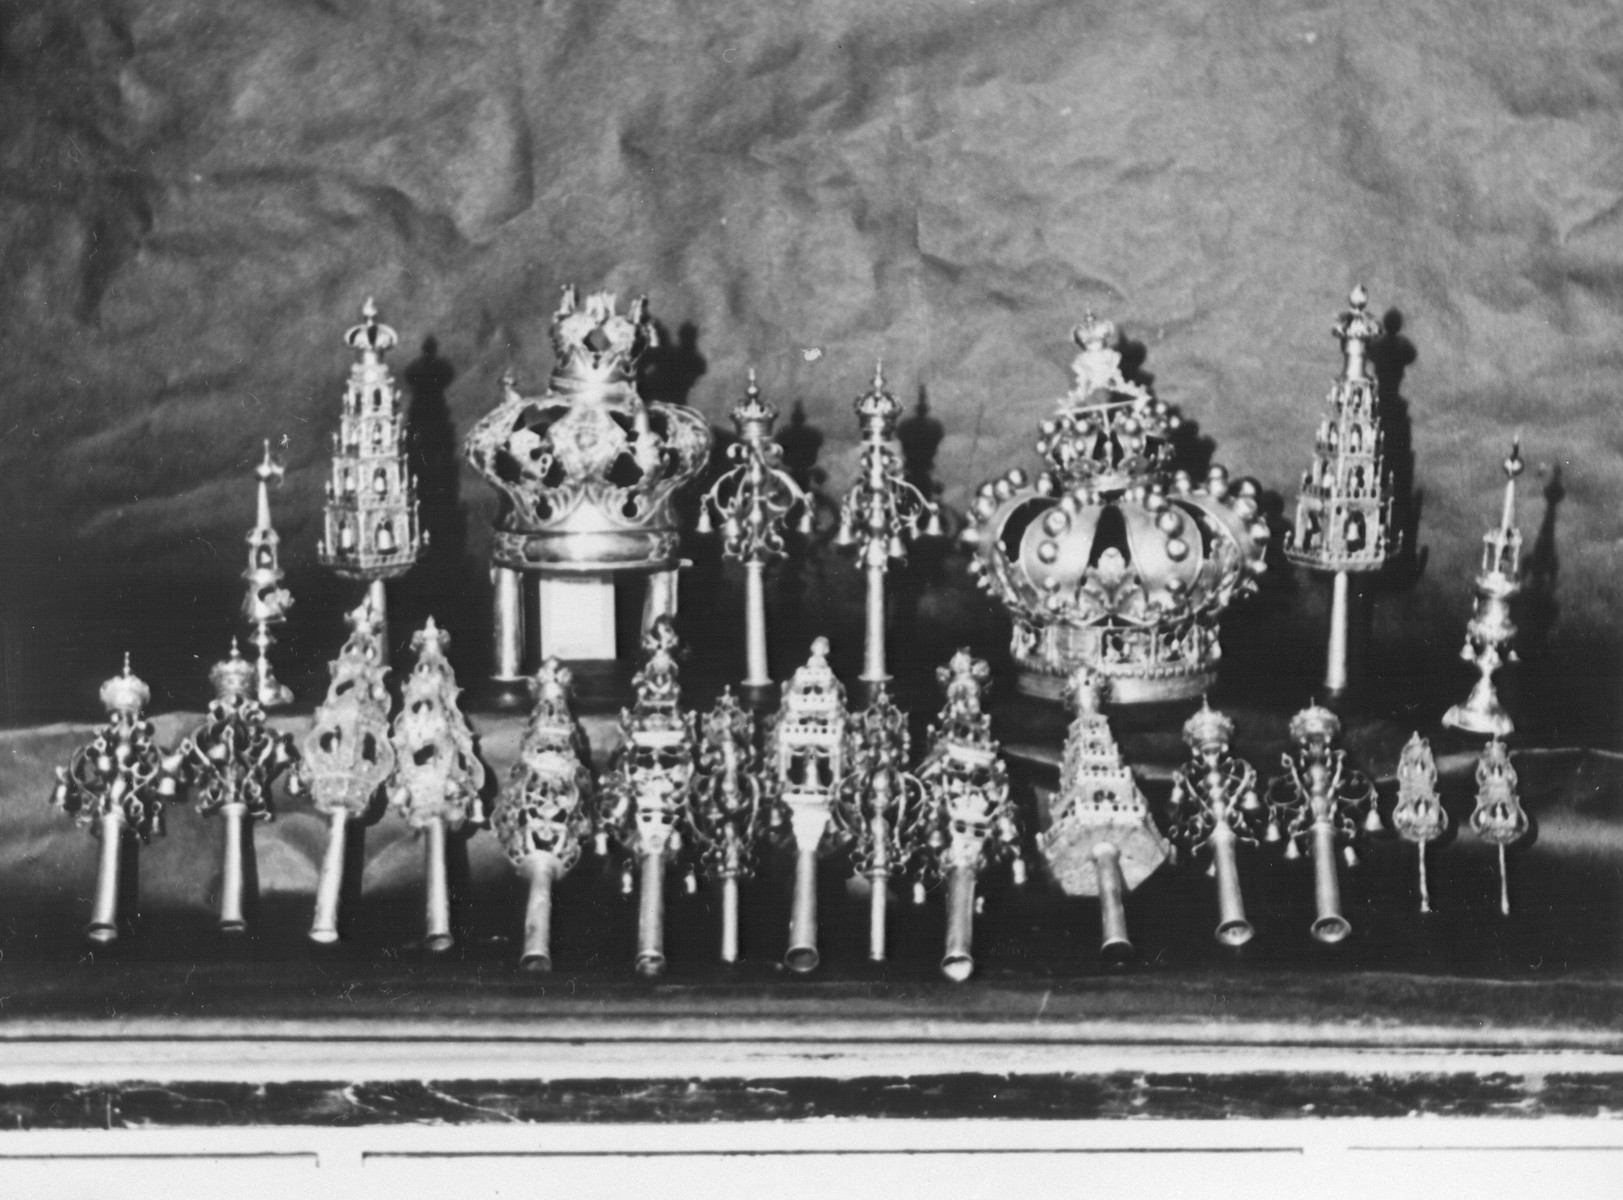 Display of confiscated silver torah crowns looted from European synagogues.